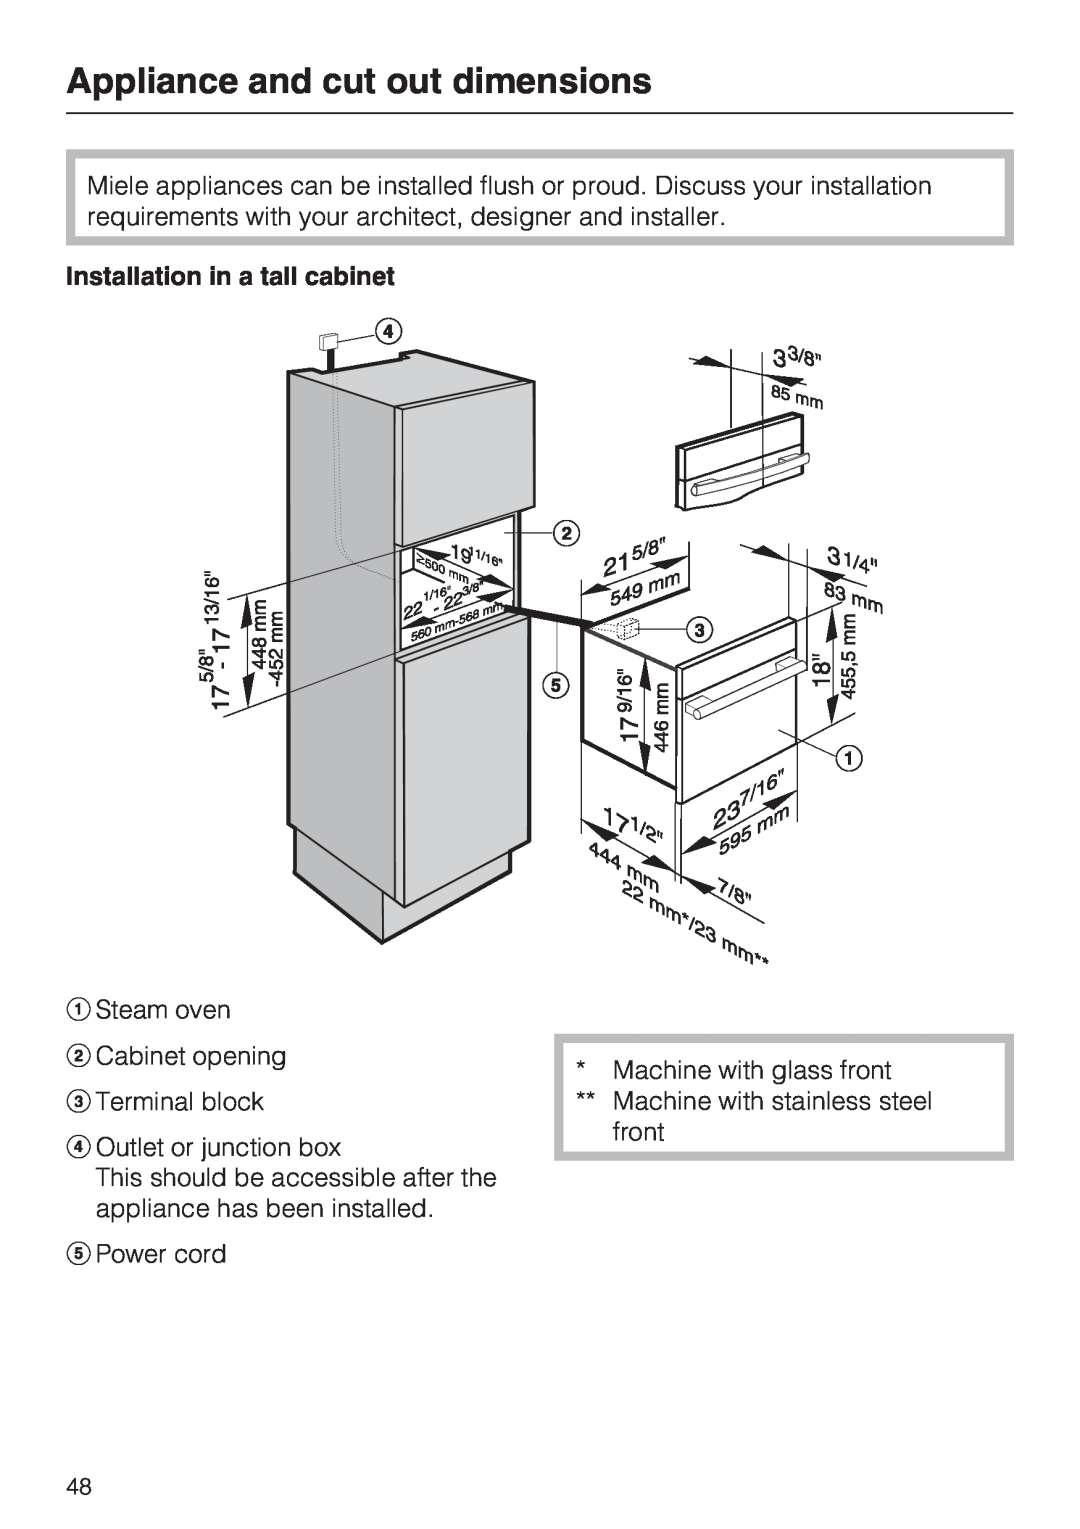 Miele DG4082, DG 4088 installation instructions Appliance and cut out dimensions, Installation in a tall cabinet 